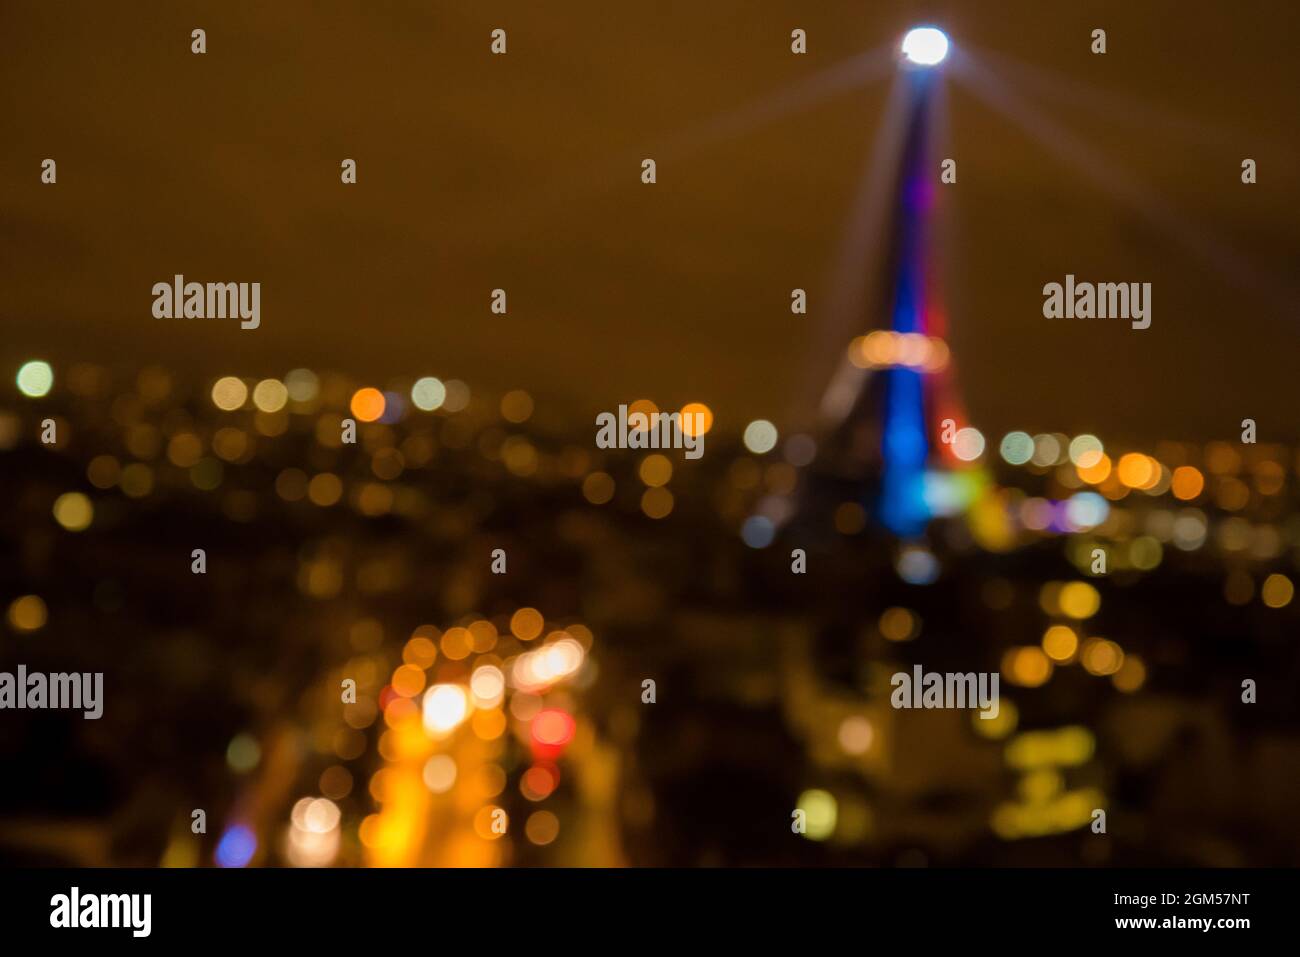 Abstract artsy blurred image of the Eiffel Tower in rainbow colors honoring the 2024 Olympics. Stock Photo